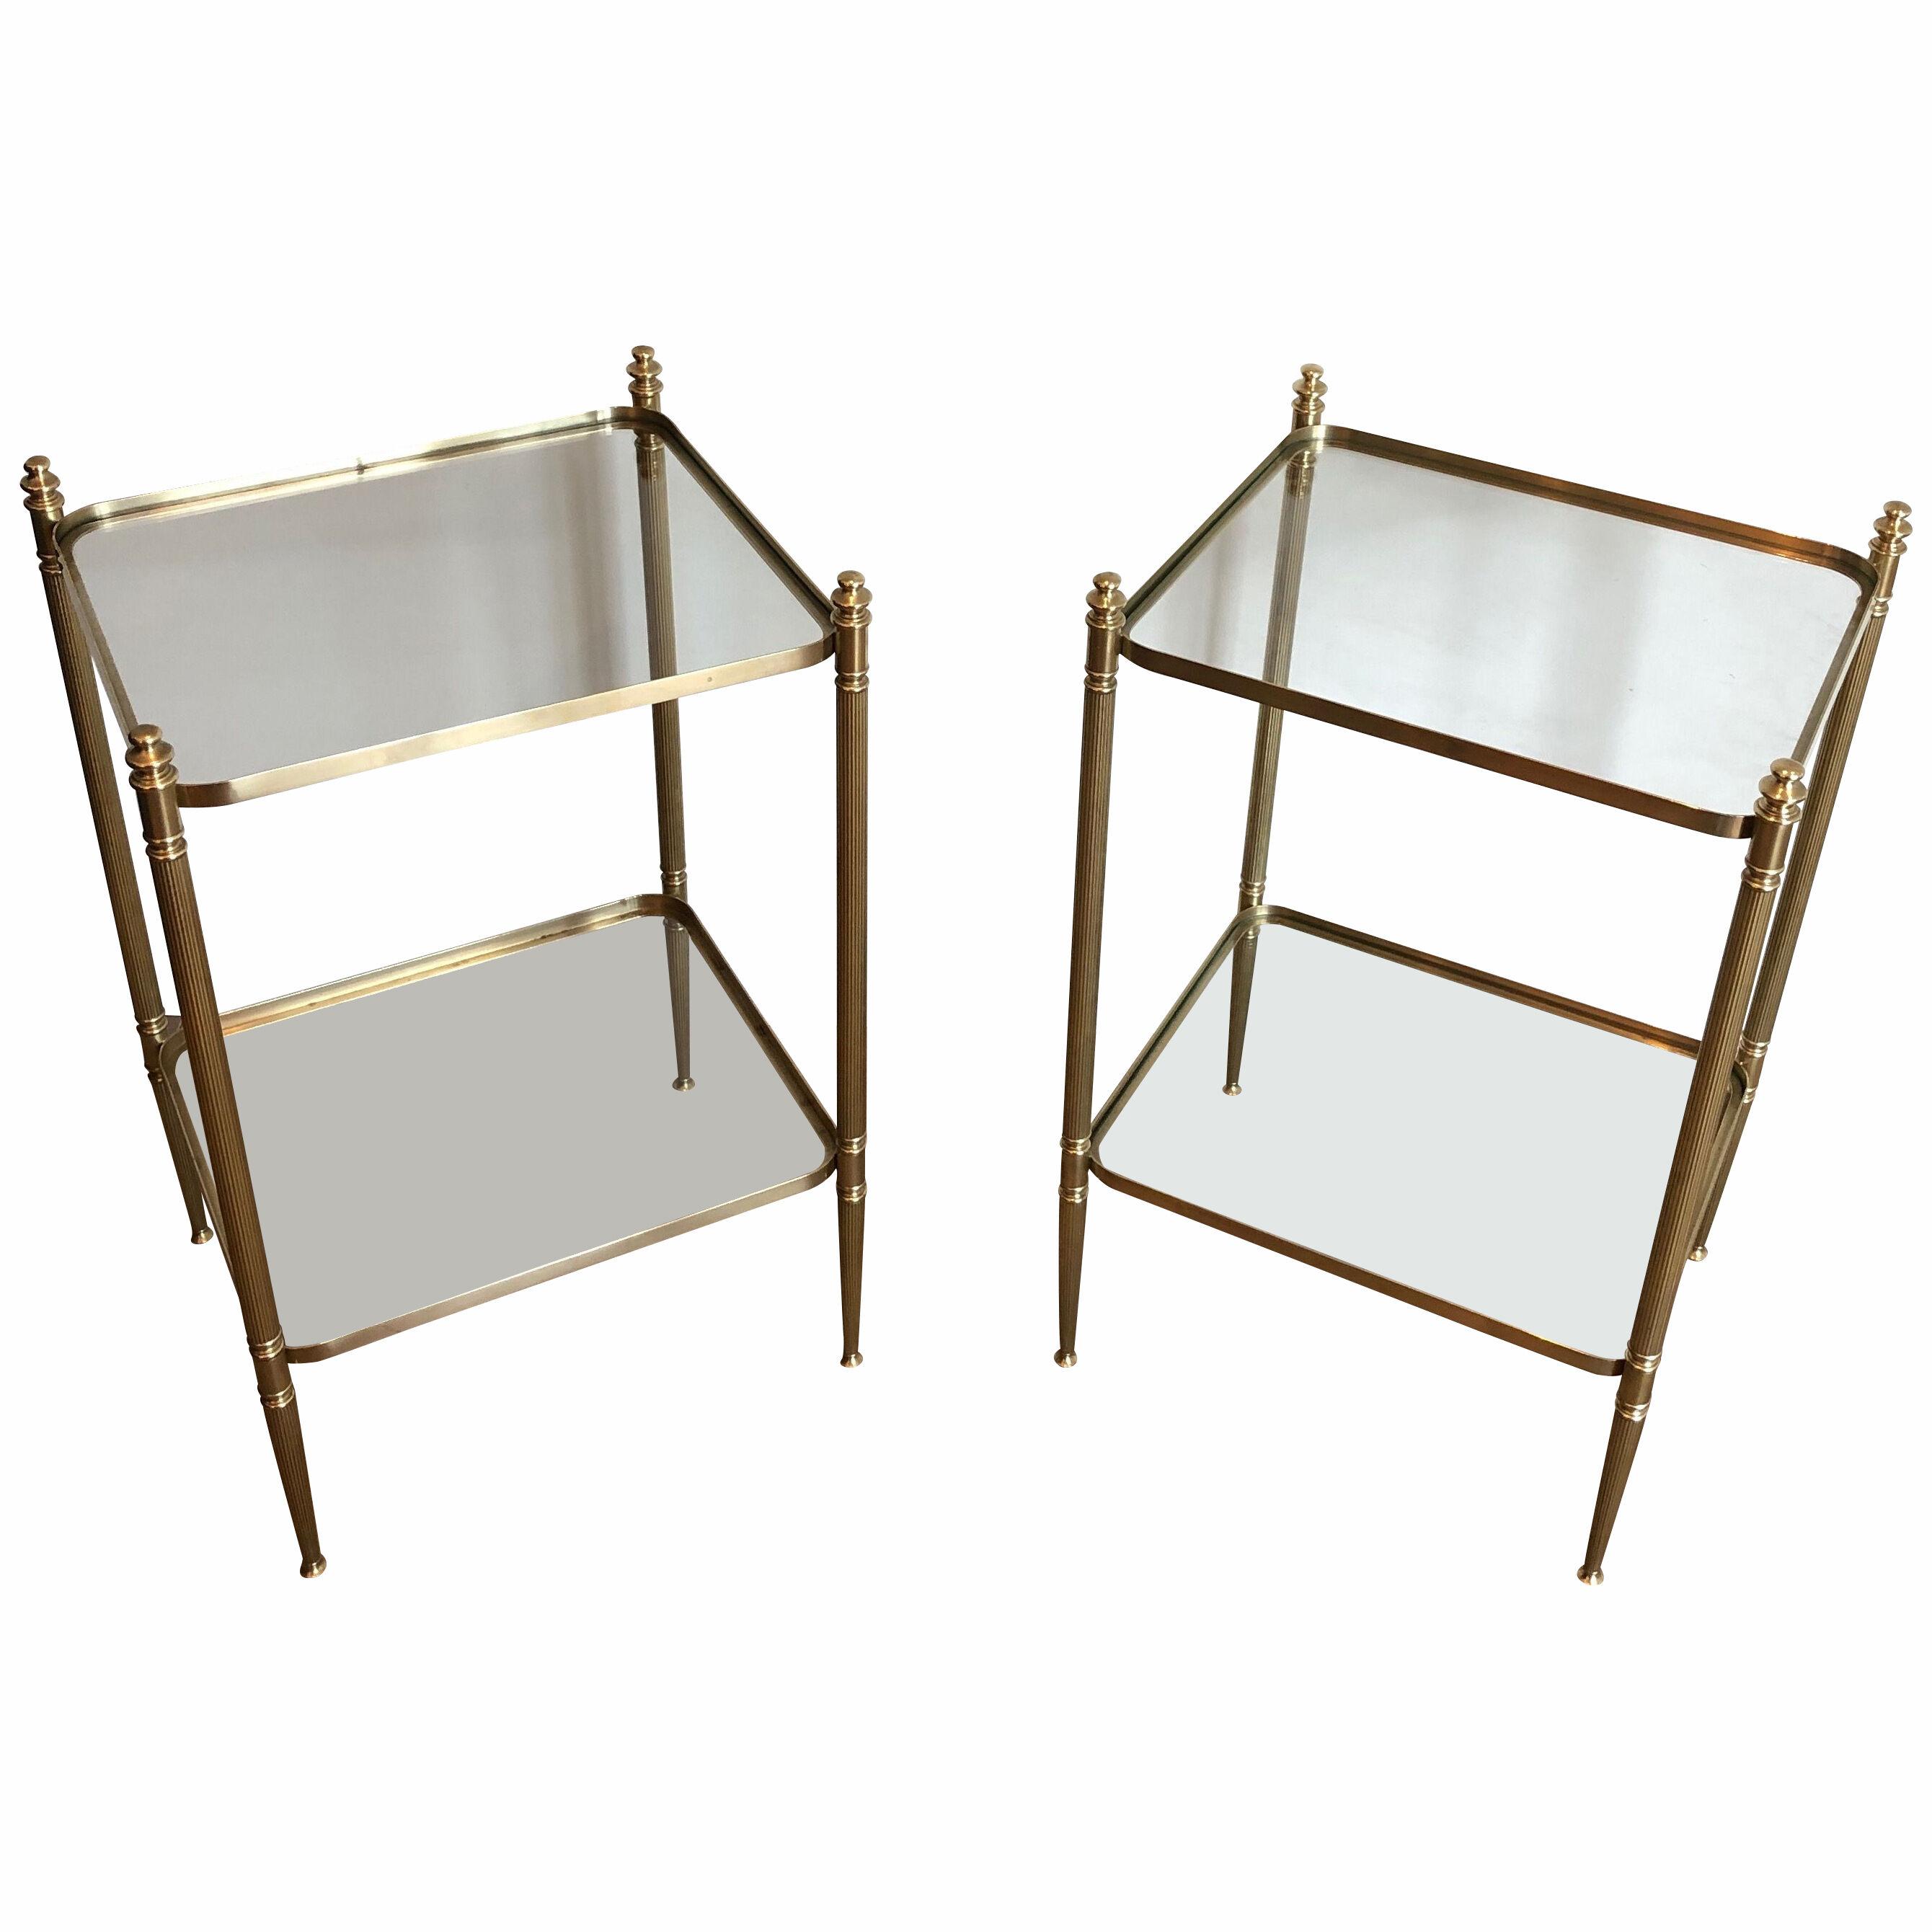 Pair of Neoclassical Style Brass Side Tables in the Style of Maison Jansen